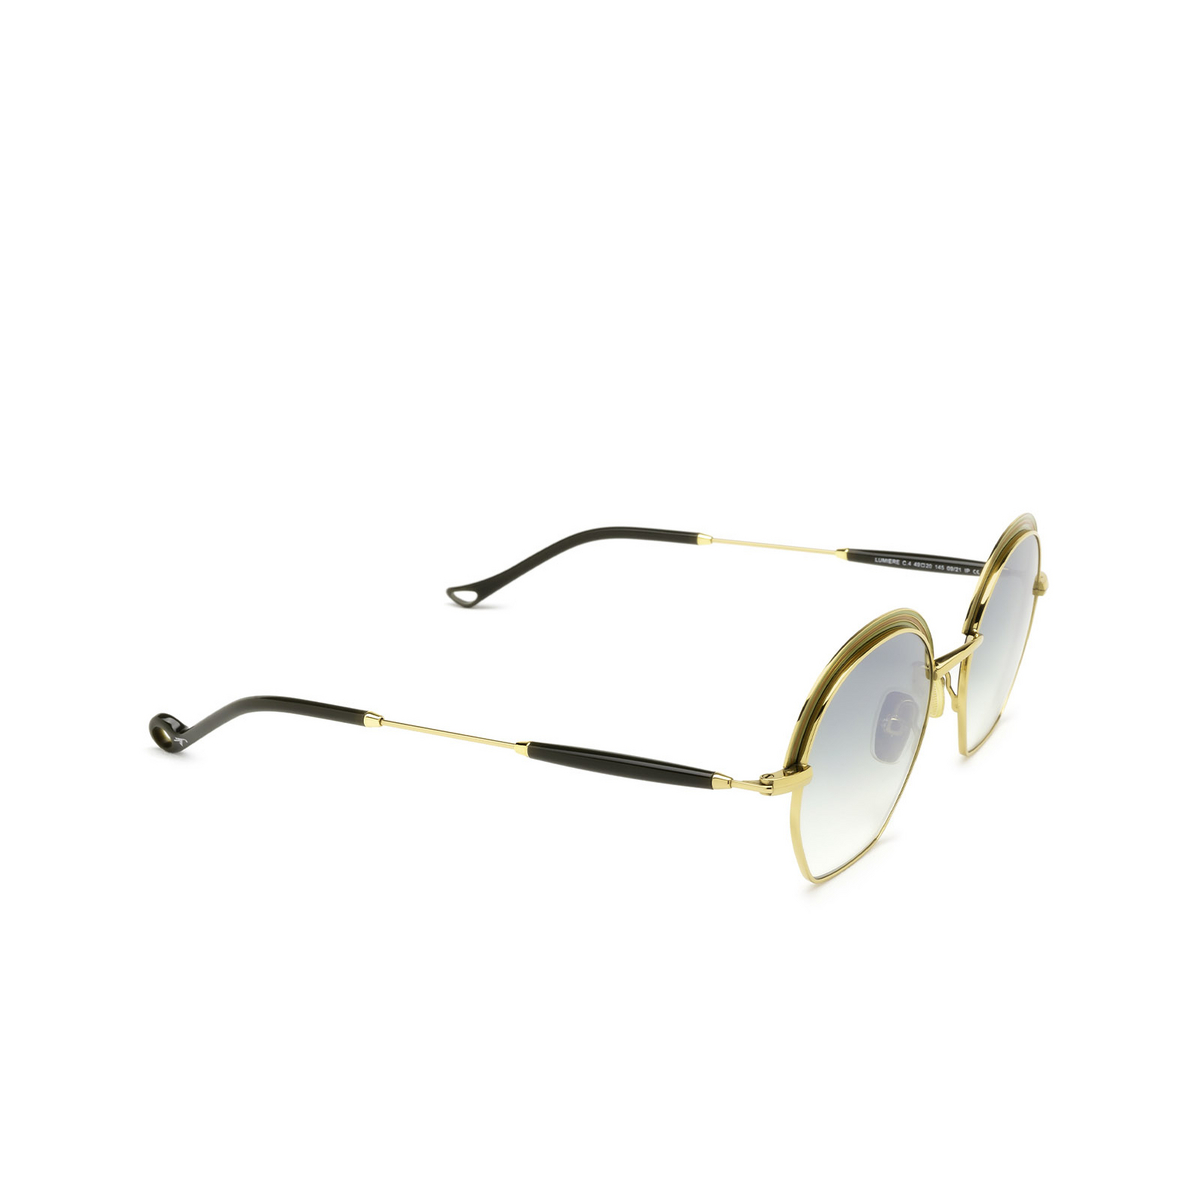 Eyepetizer® Sunglasses: Lumiere Sun color Green And Gold C.4-25F - front view.